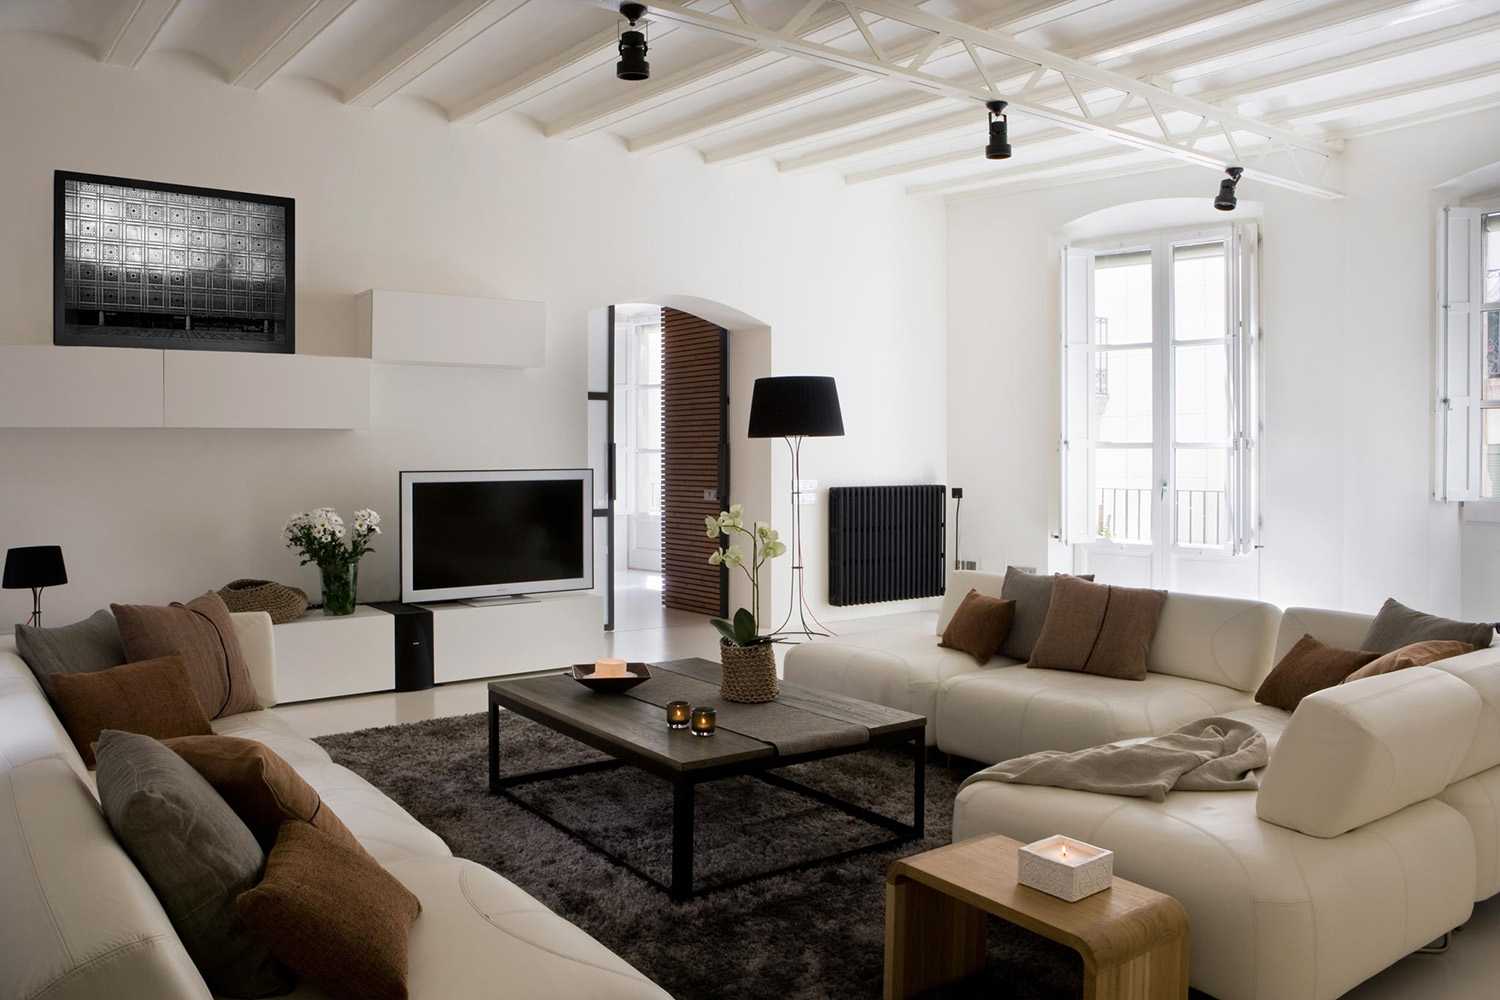 The light-colored living area and the completely white ceiling